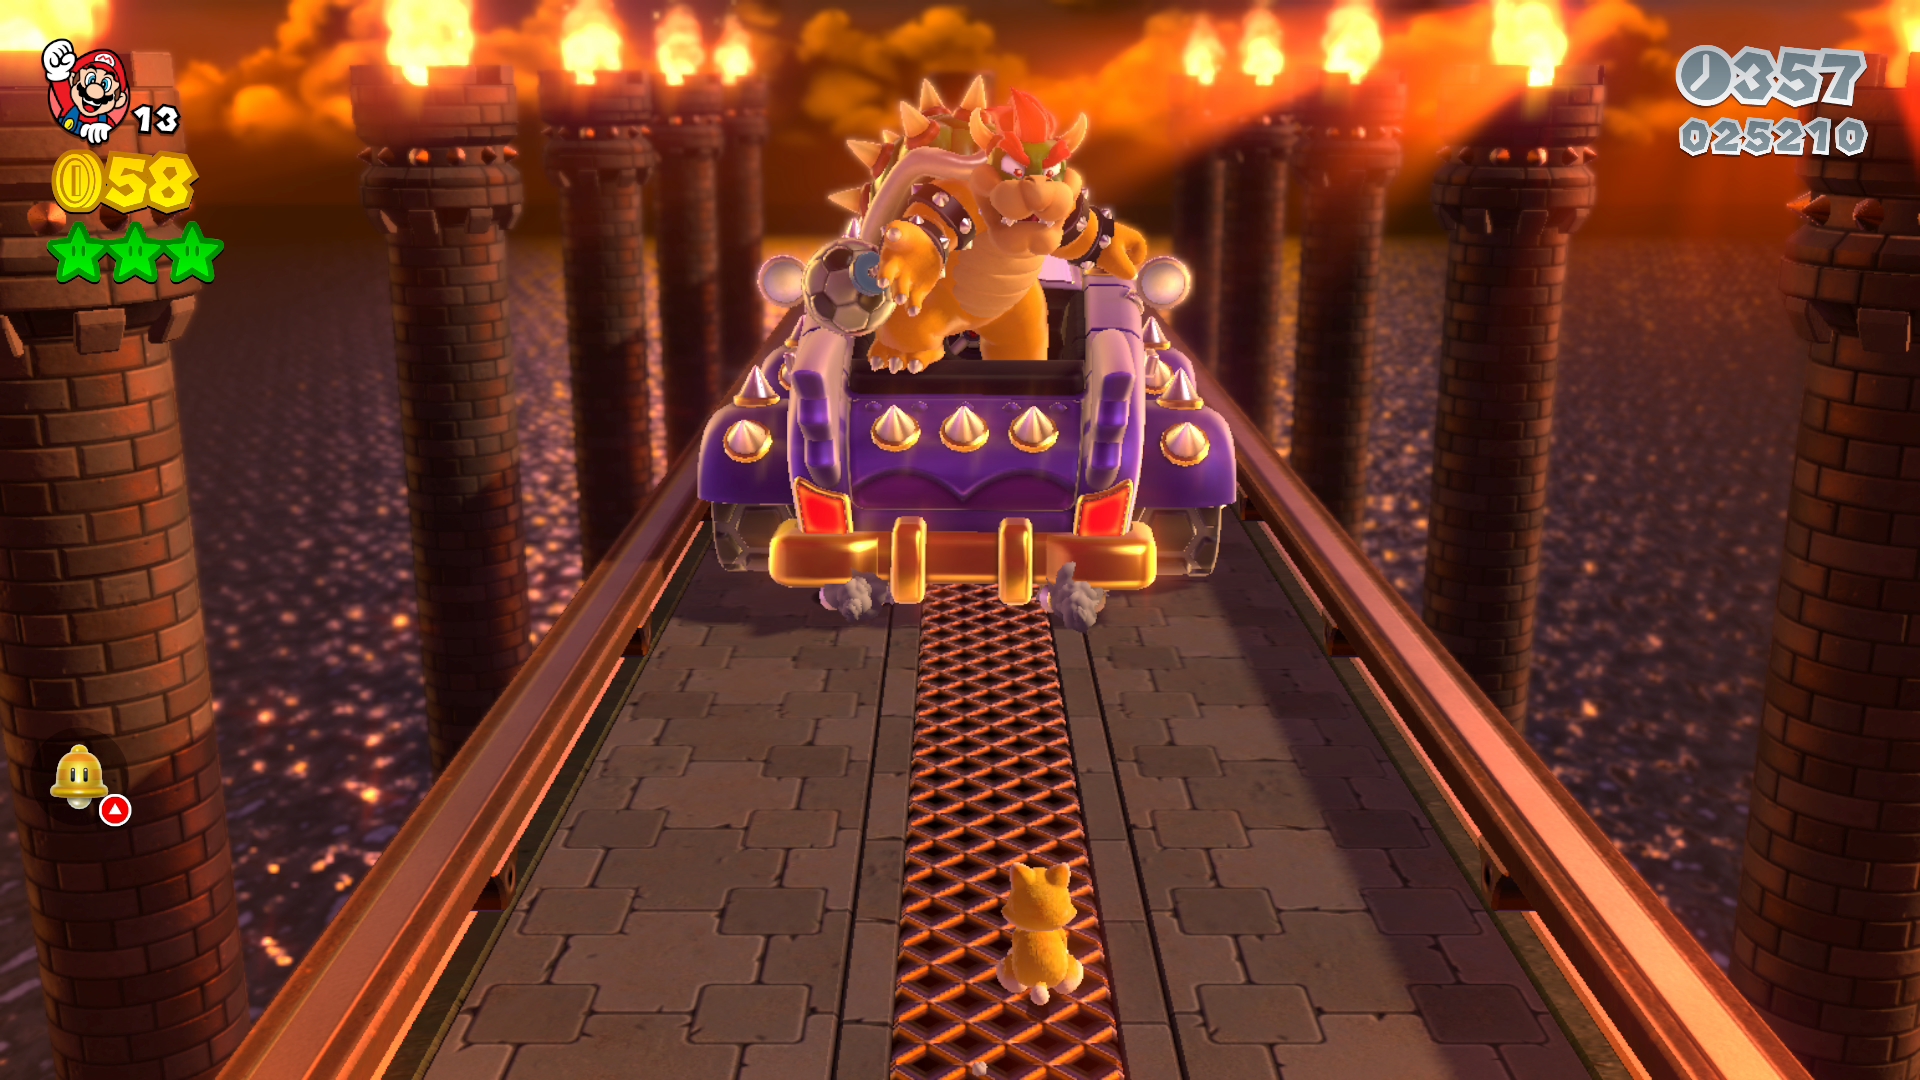 Mario 3D World + Bowser’s Fury is a Wii U gem that deserves a stage on the Switch